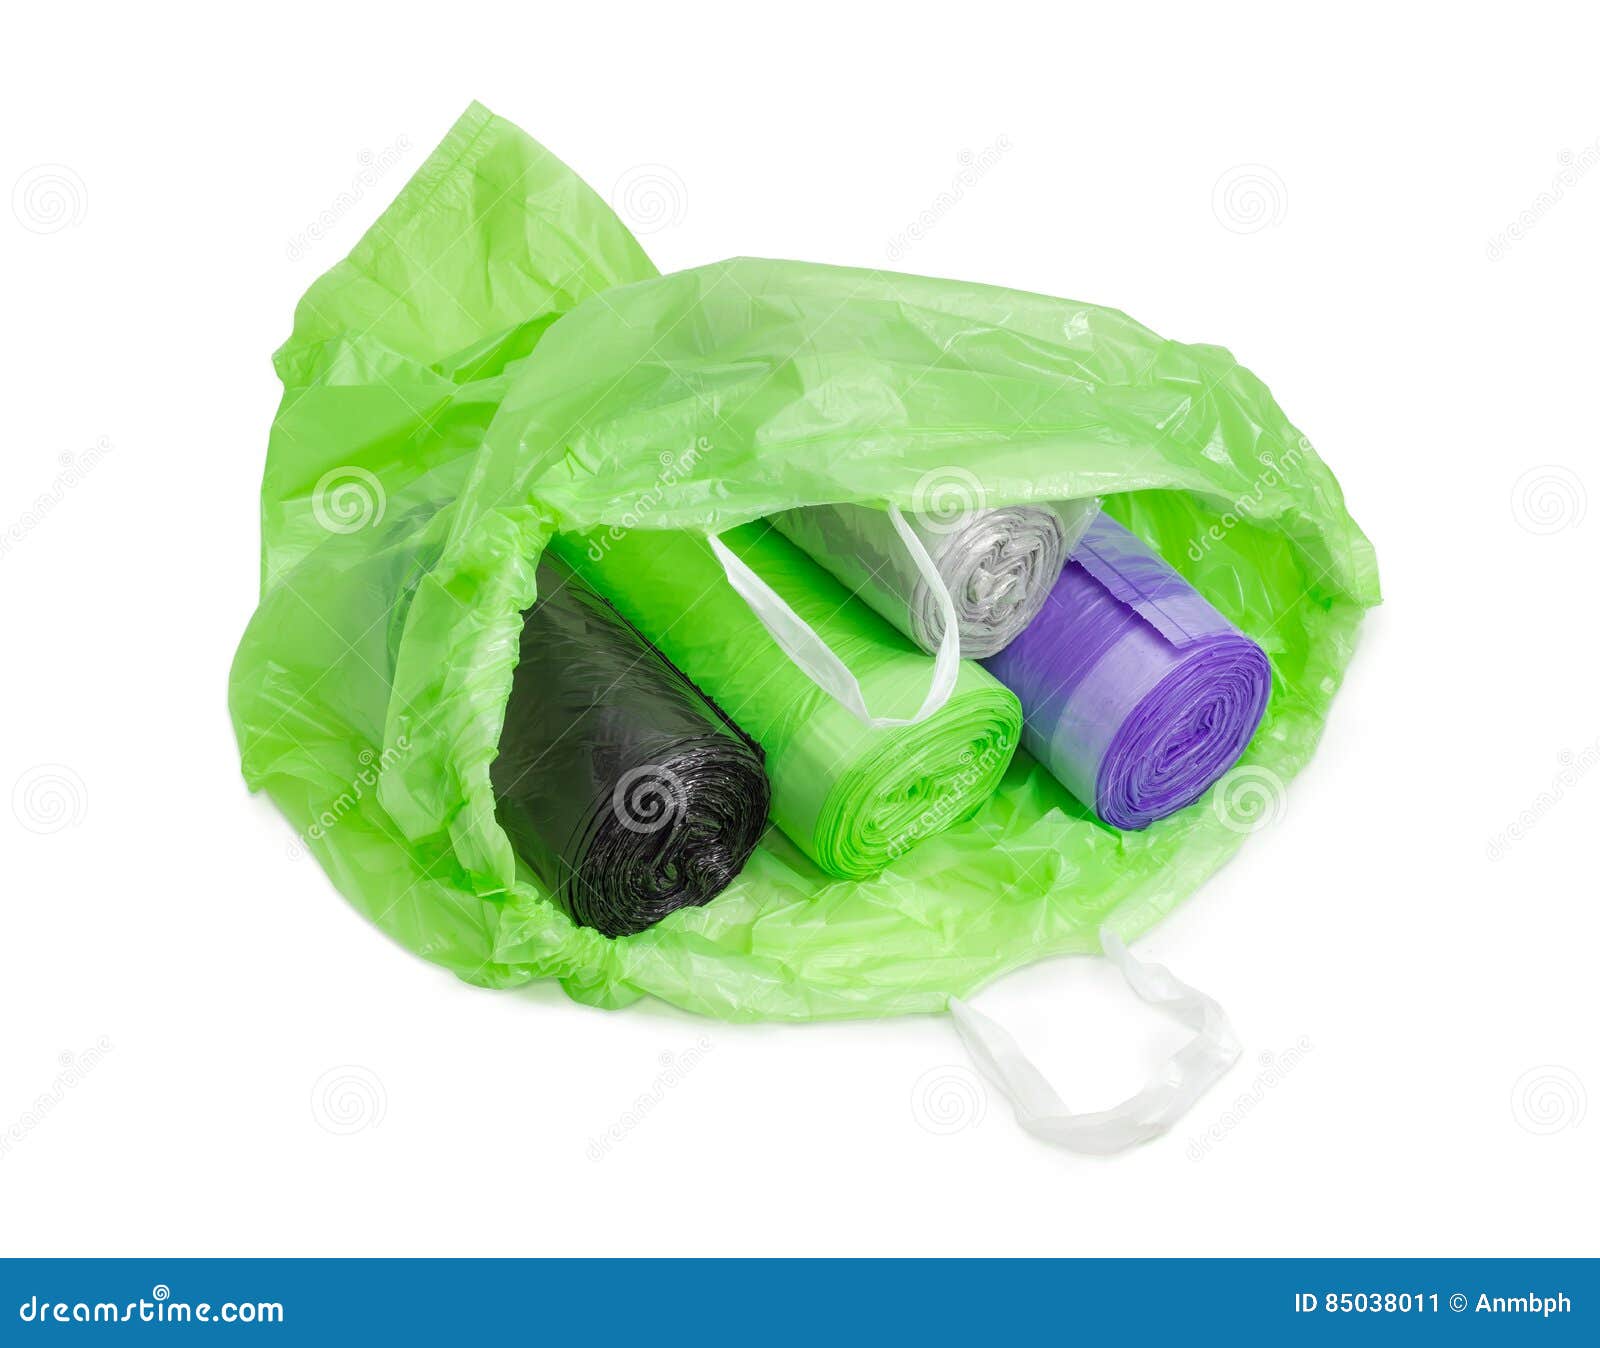 https://thumbs.dreamstime.com/z/different-garbage-bags-rolls-open-green-garbage-bag-several-plastic-disposable-sizes-colors-handles-made-85038011.jpg